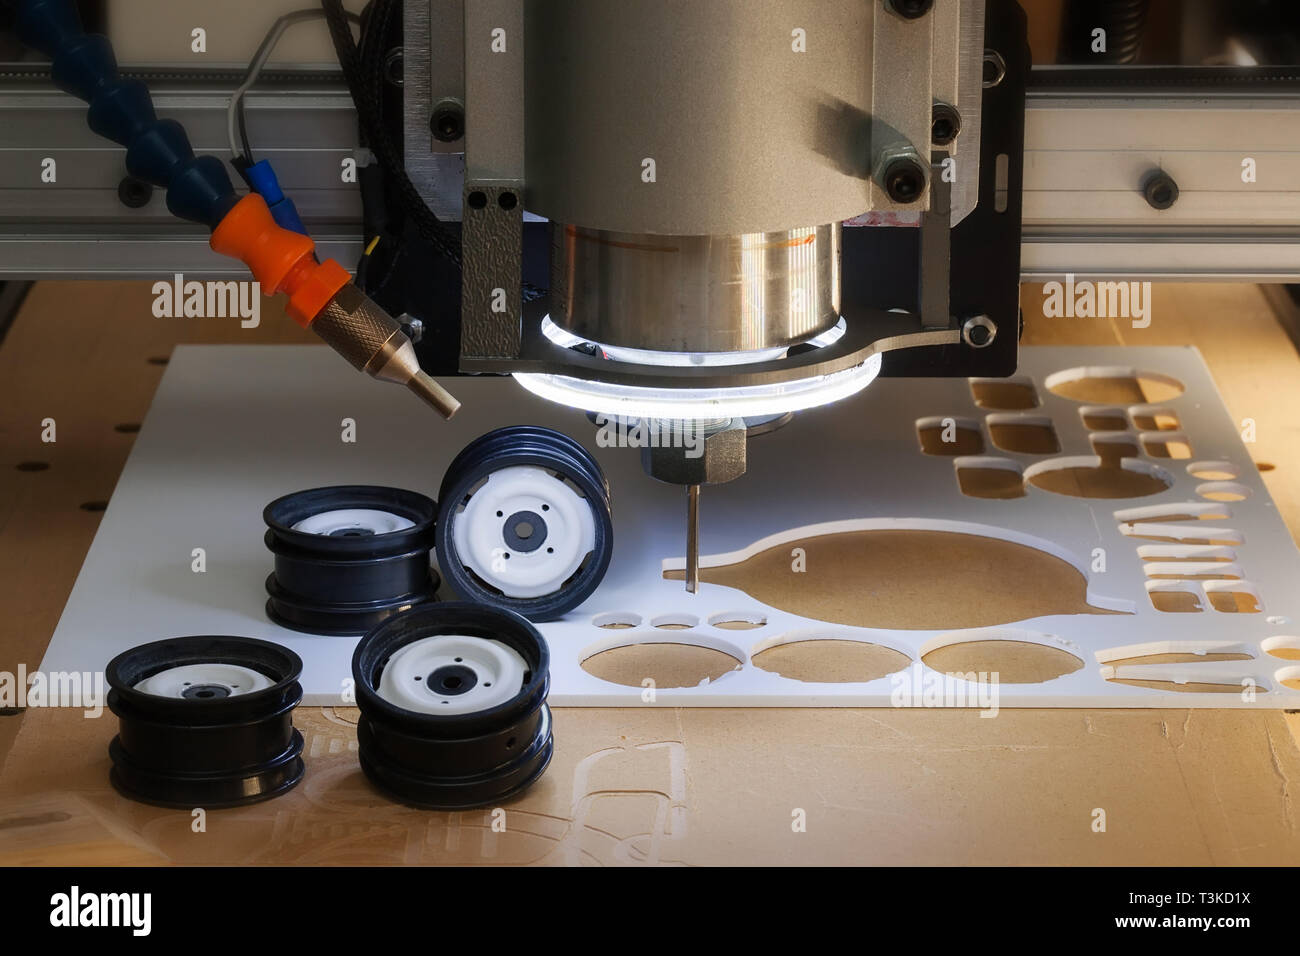 Desktop CNC machine used to make scale model rims and wheels from ABS plastic material. Stock Photo